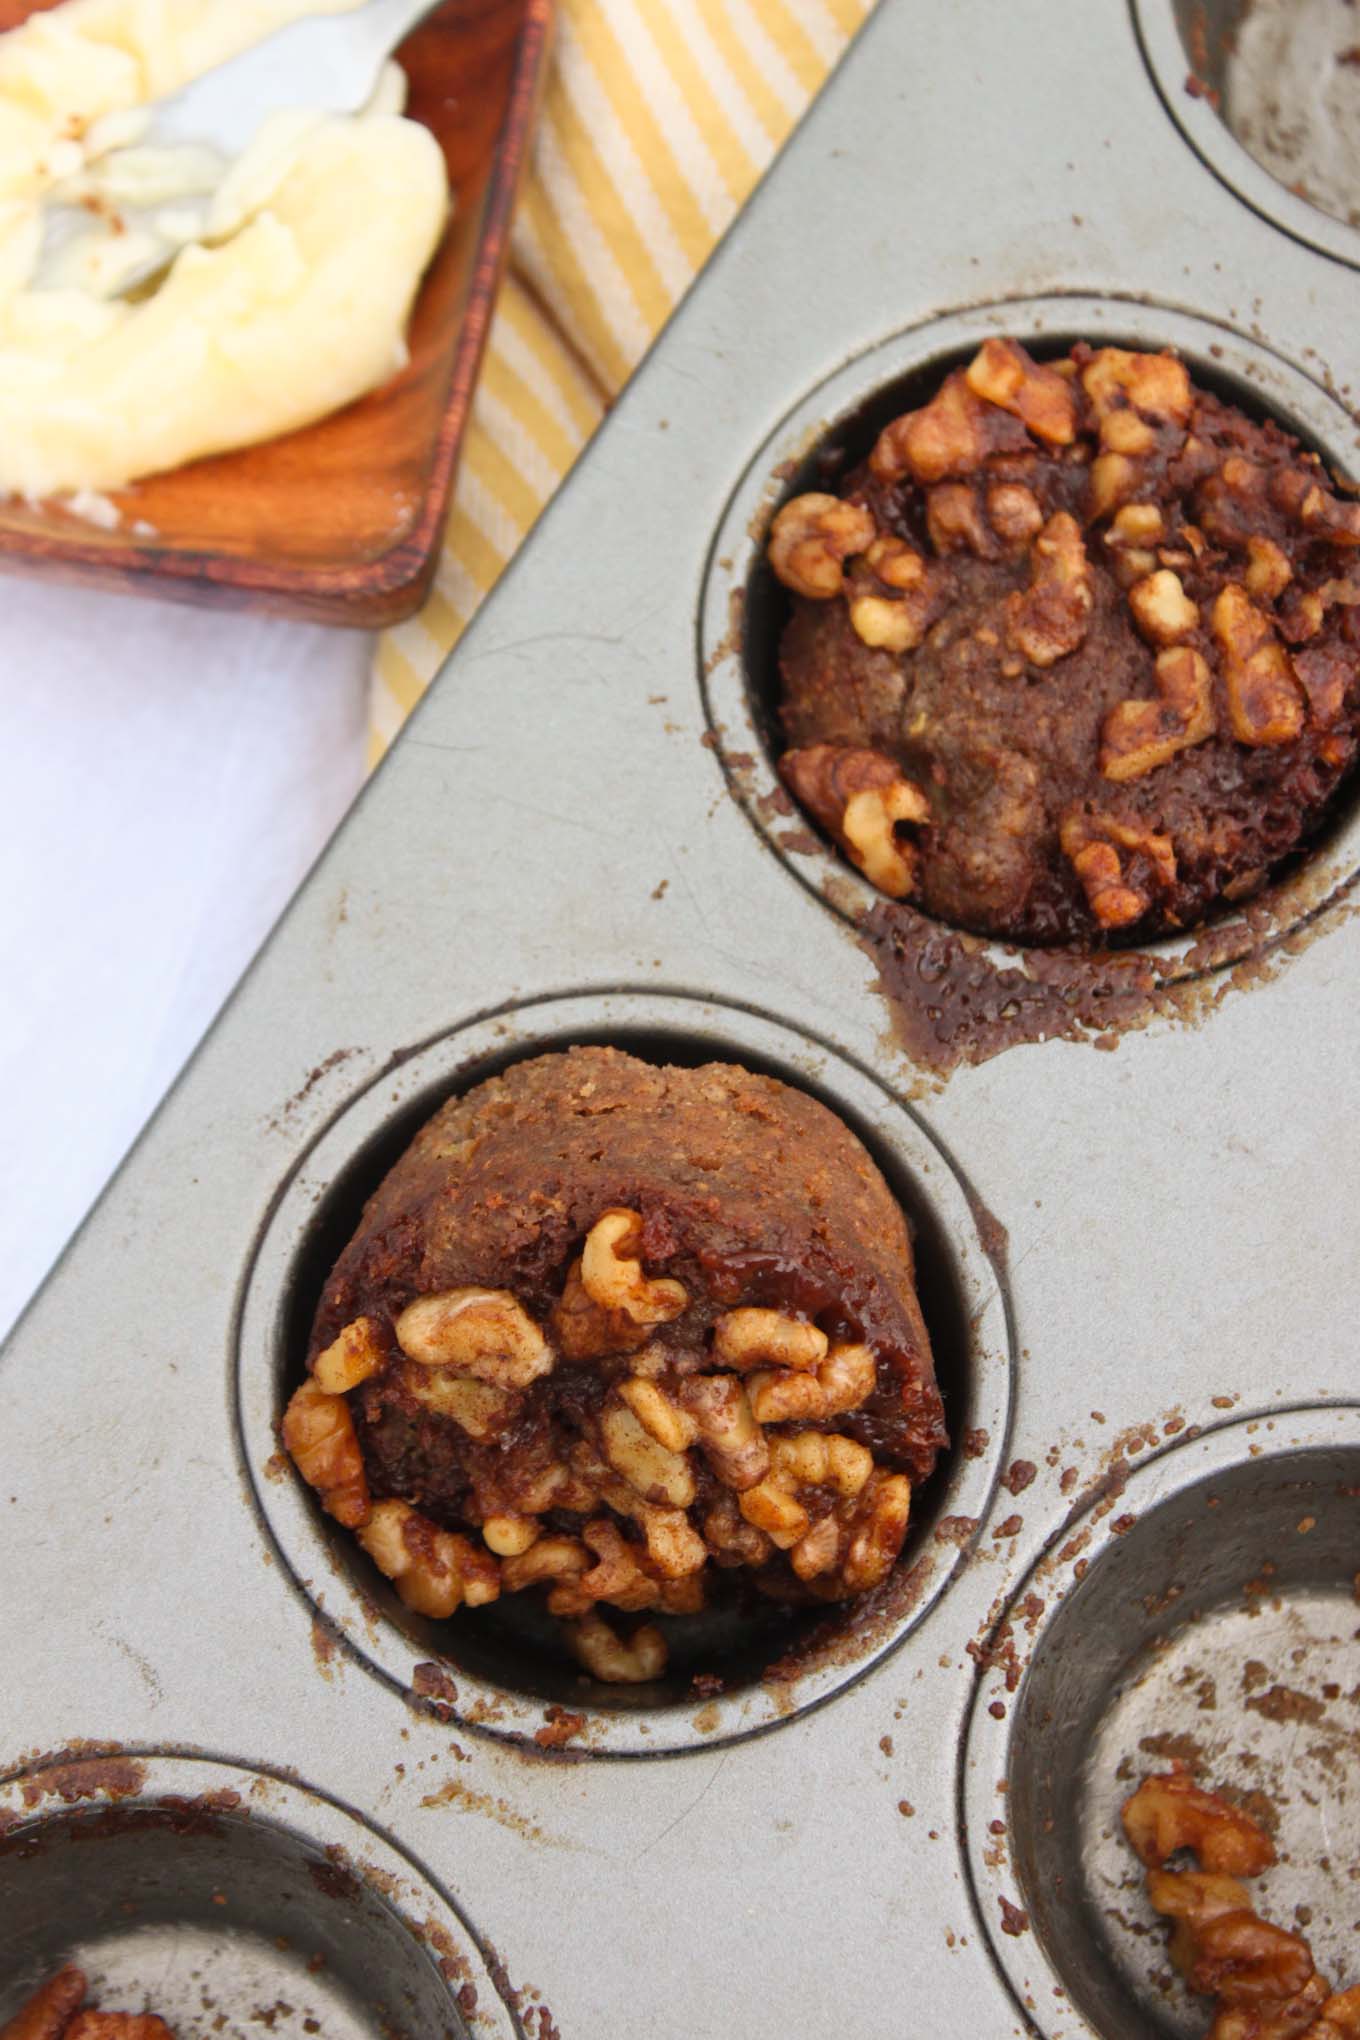 Spiced Zucchini Muffins with Streusel Topping | simplerootswellness.com